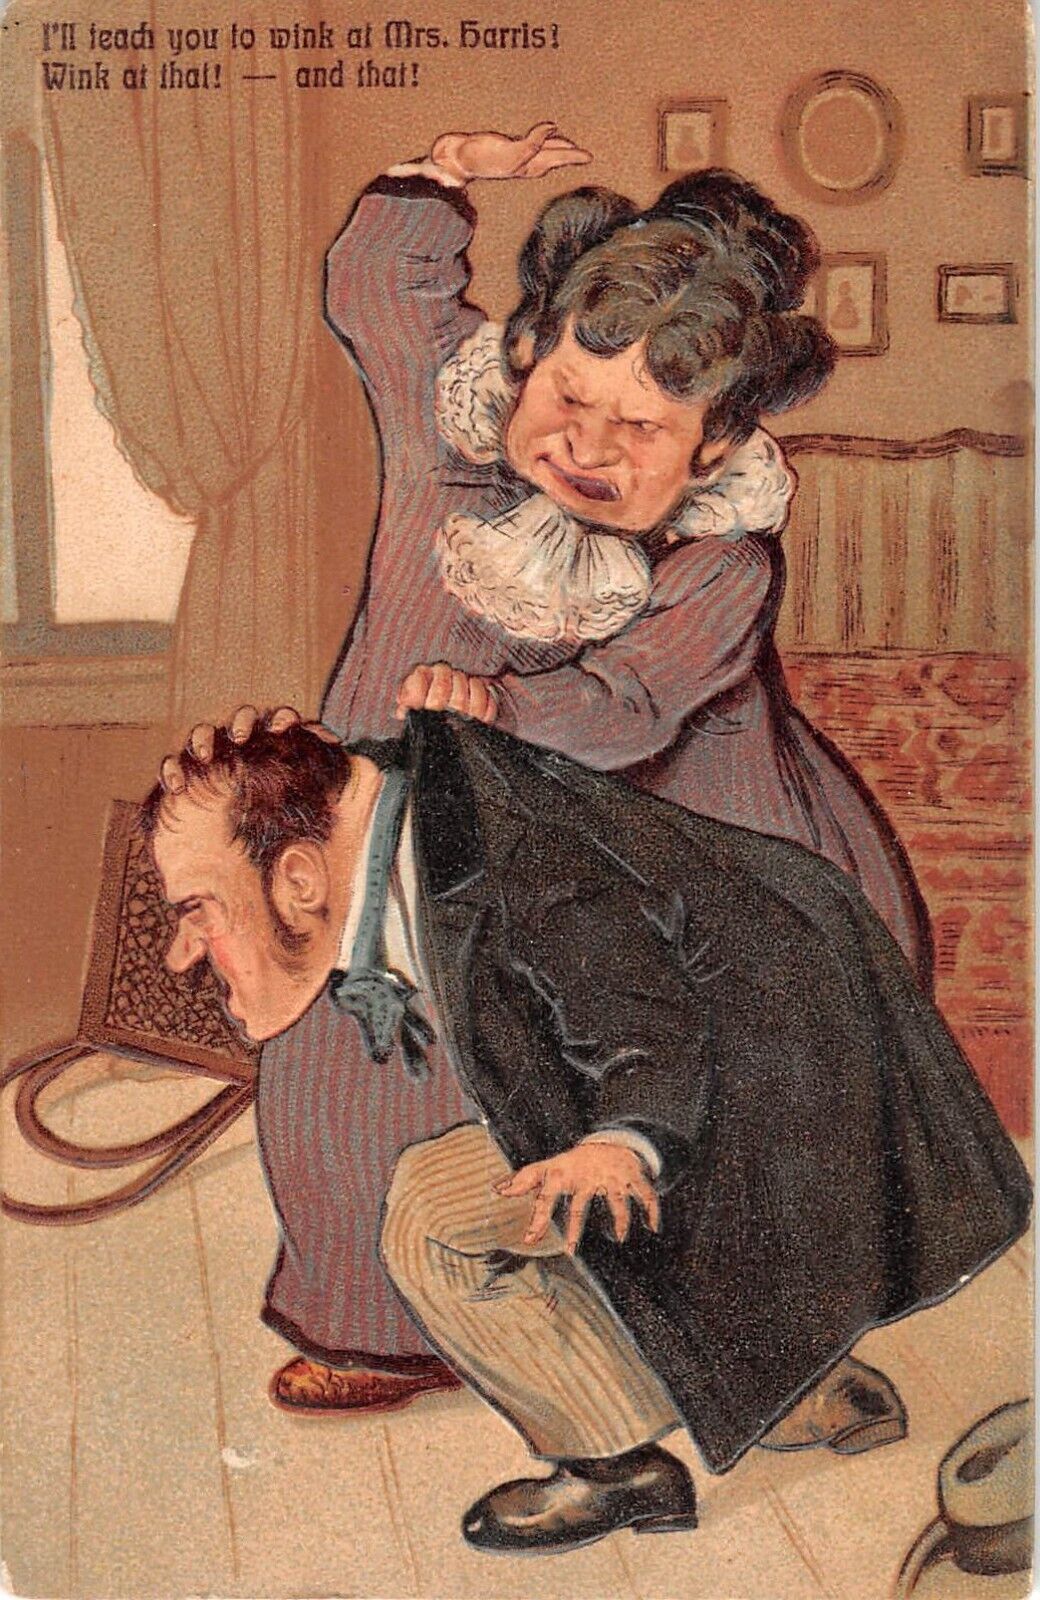 Angry Wife Beating Husband for Winking At Mrs. Harris-1907 Comic PC-PFB Ser.6538